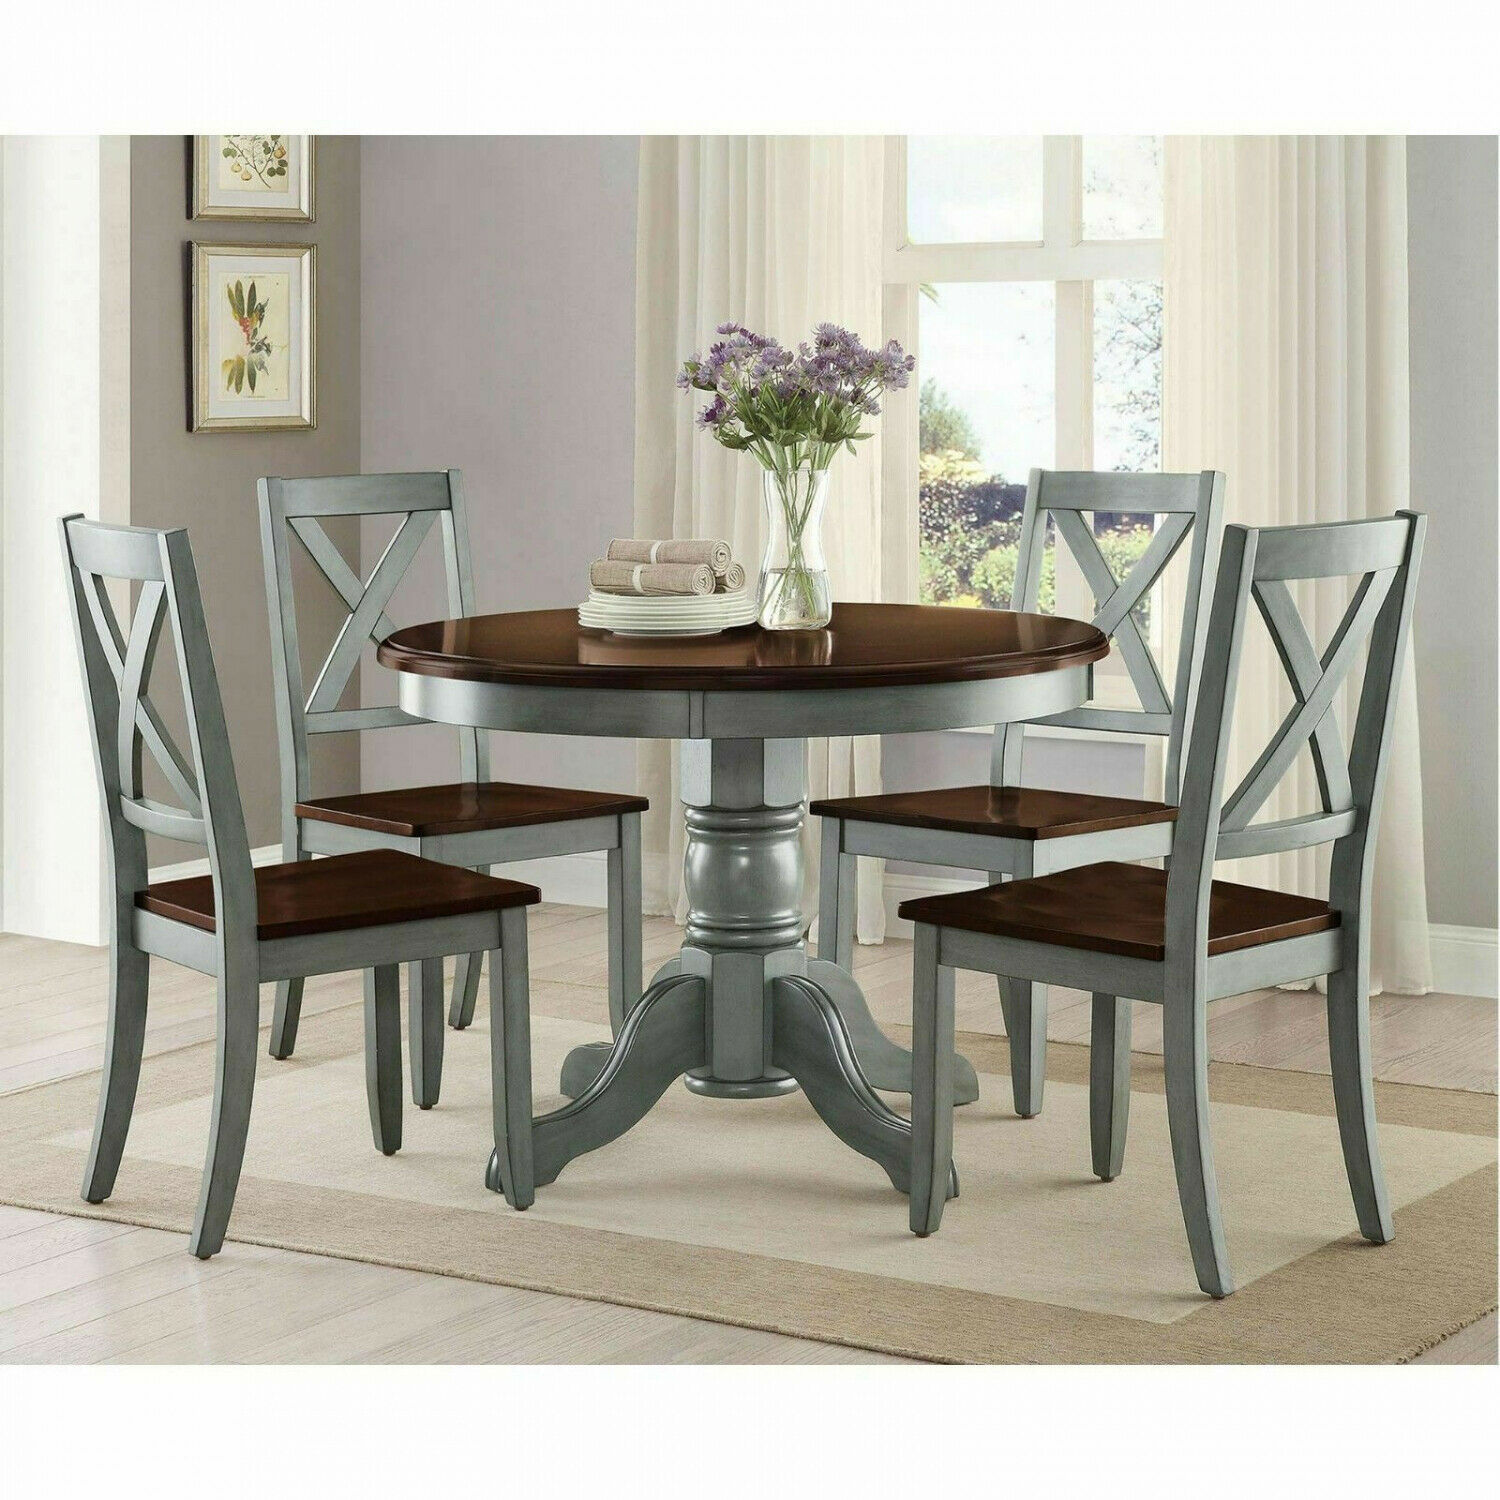 Round Dining Table Set 5Piece Farmhouse Rustic Kitchen Wood Tables and